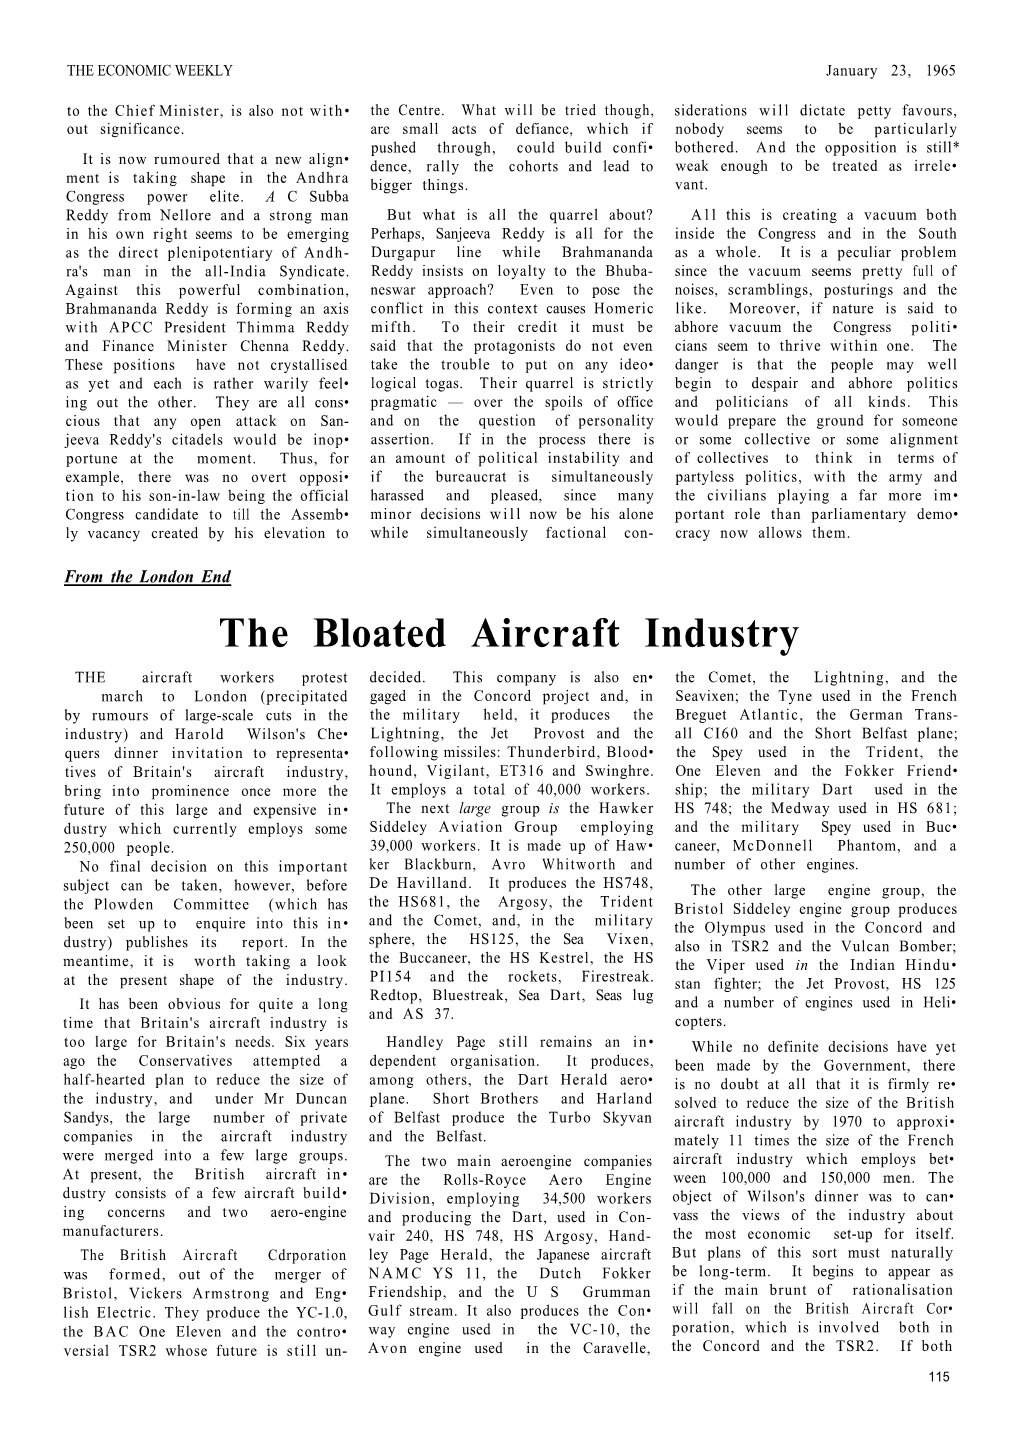 The Bloated Aircraft Industry the Aircraft Workers Protest Decided